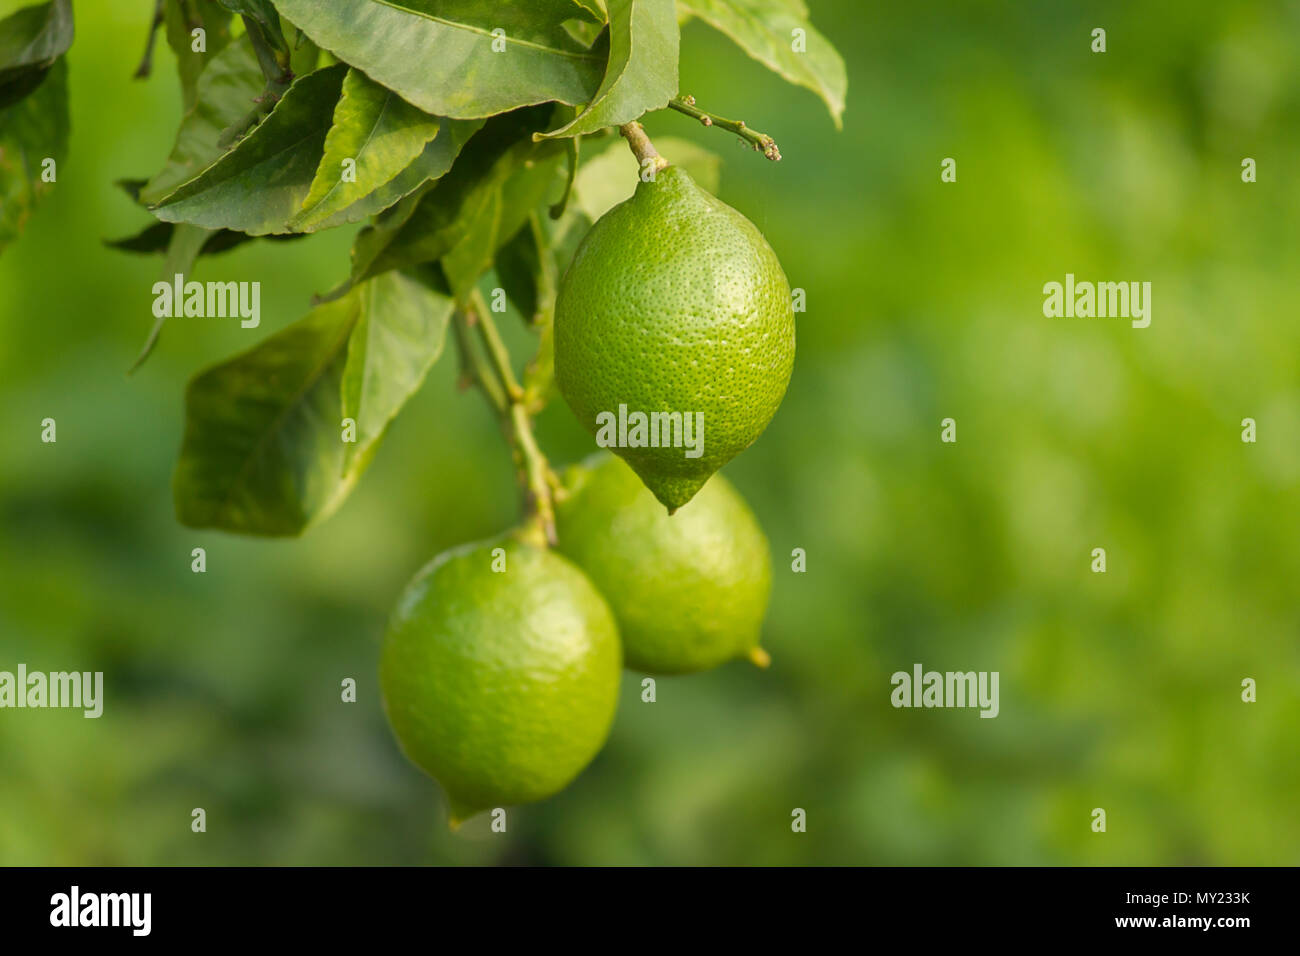 Close-up photo of green lemons on the branche with a green blury backgroud Stock Photo